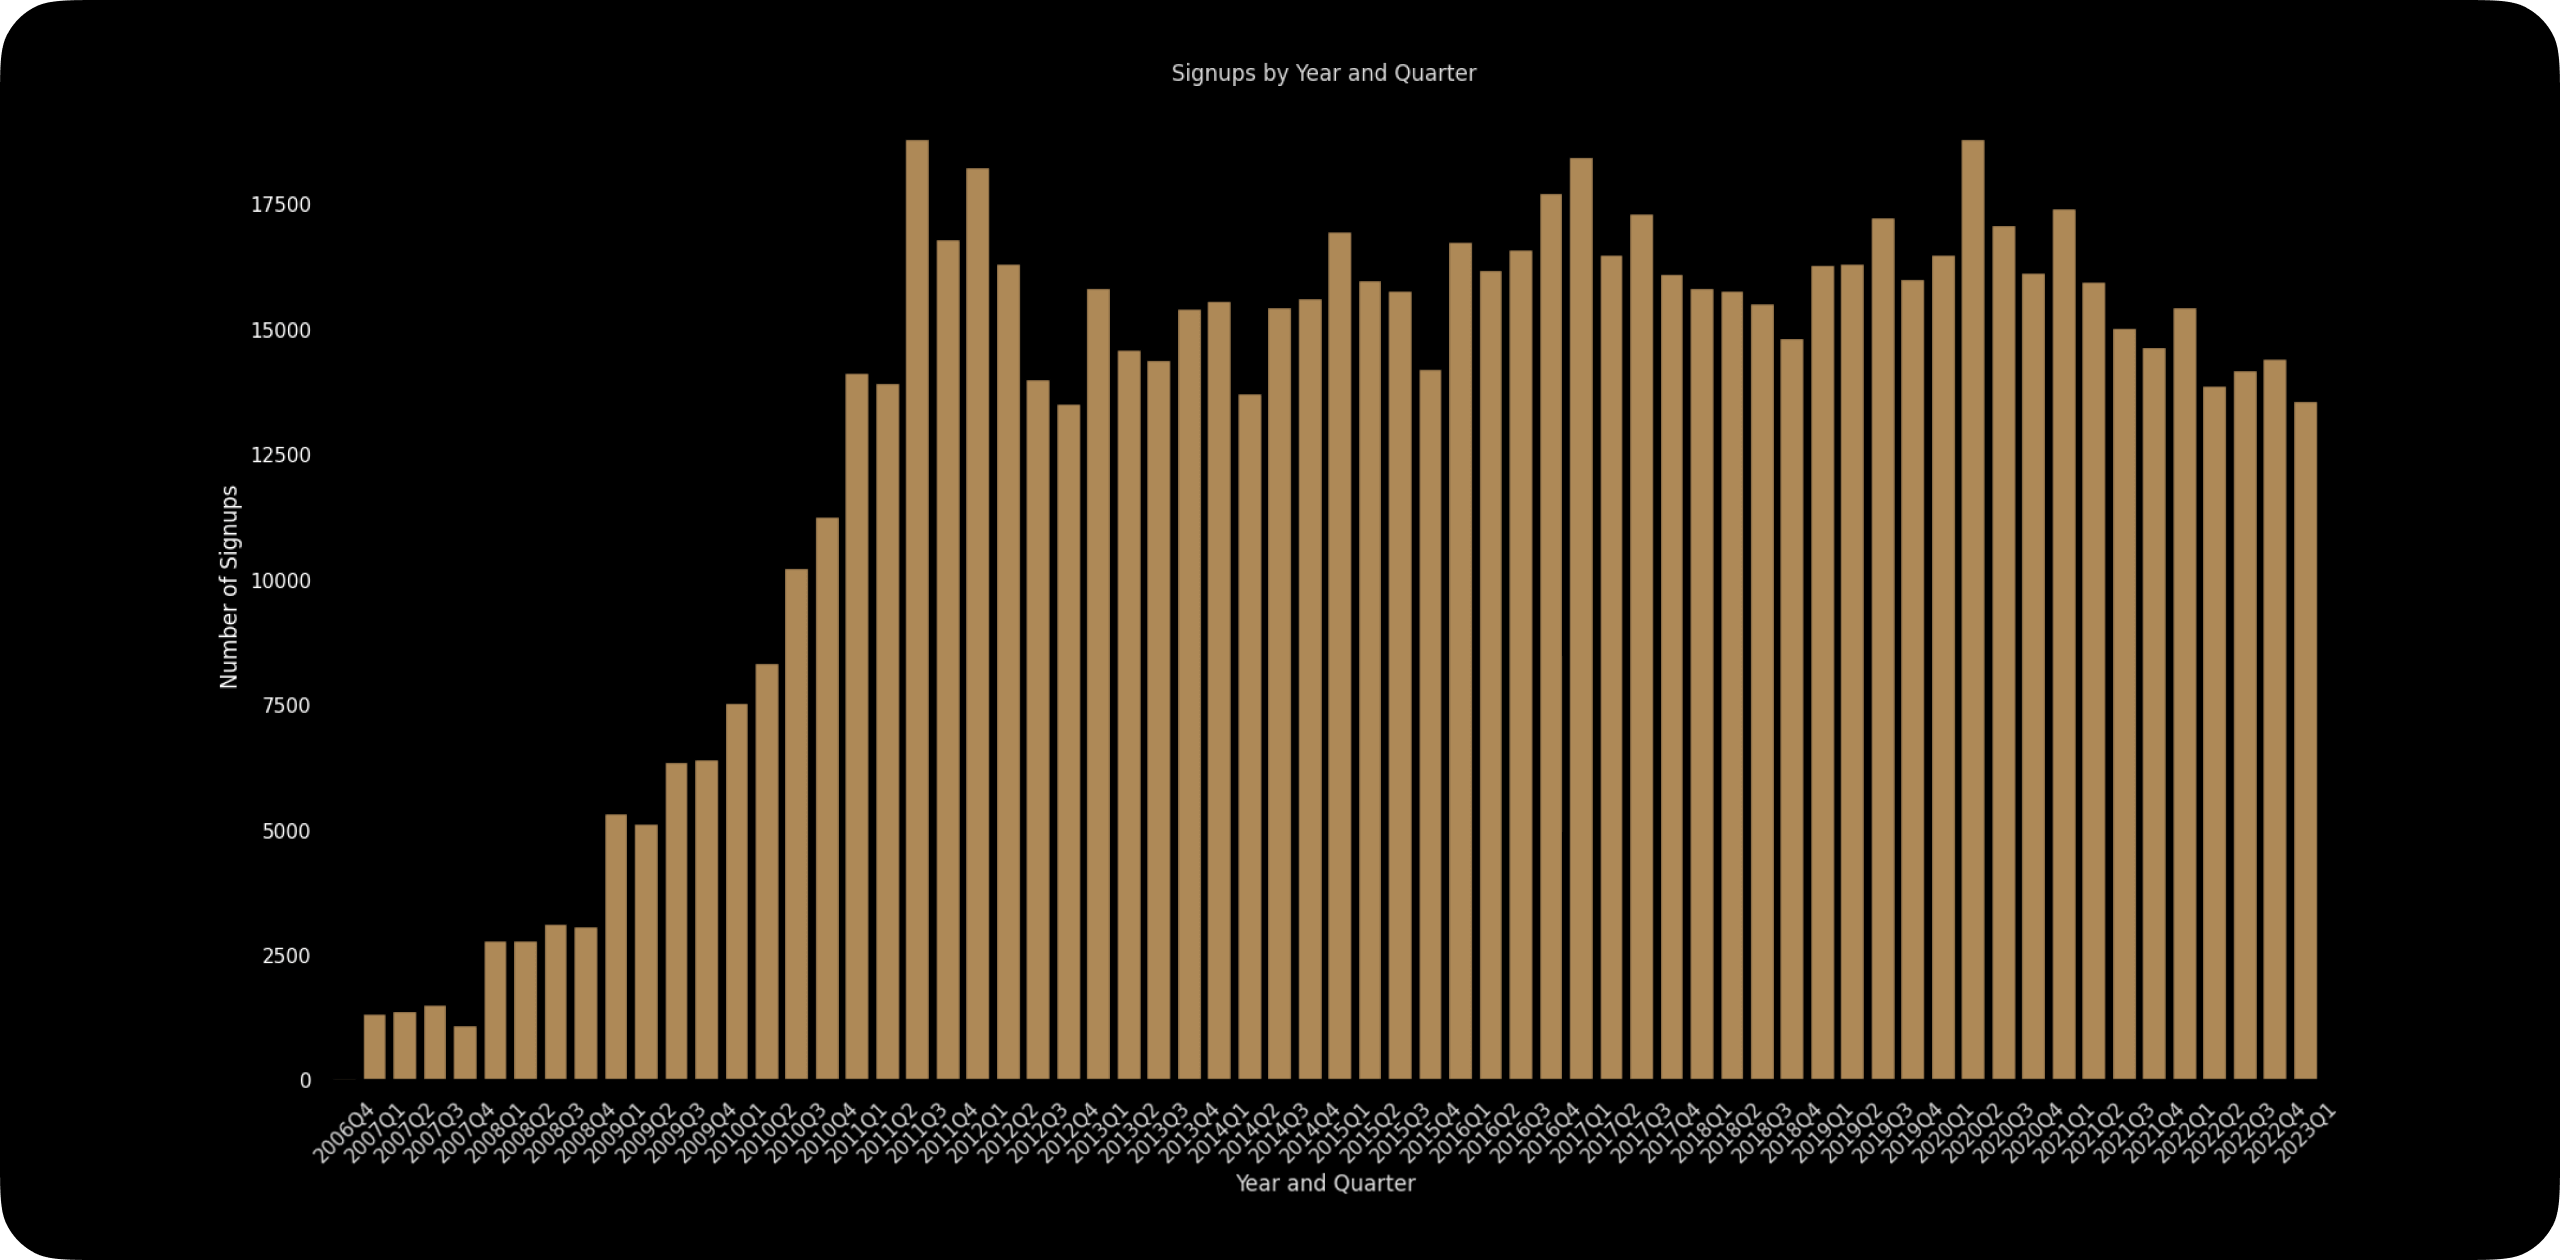 Plot | Over the past decade, signups on HackerNews have remained stable.